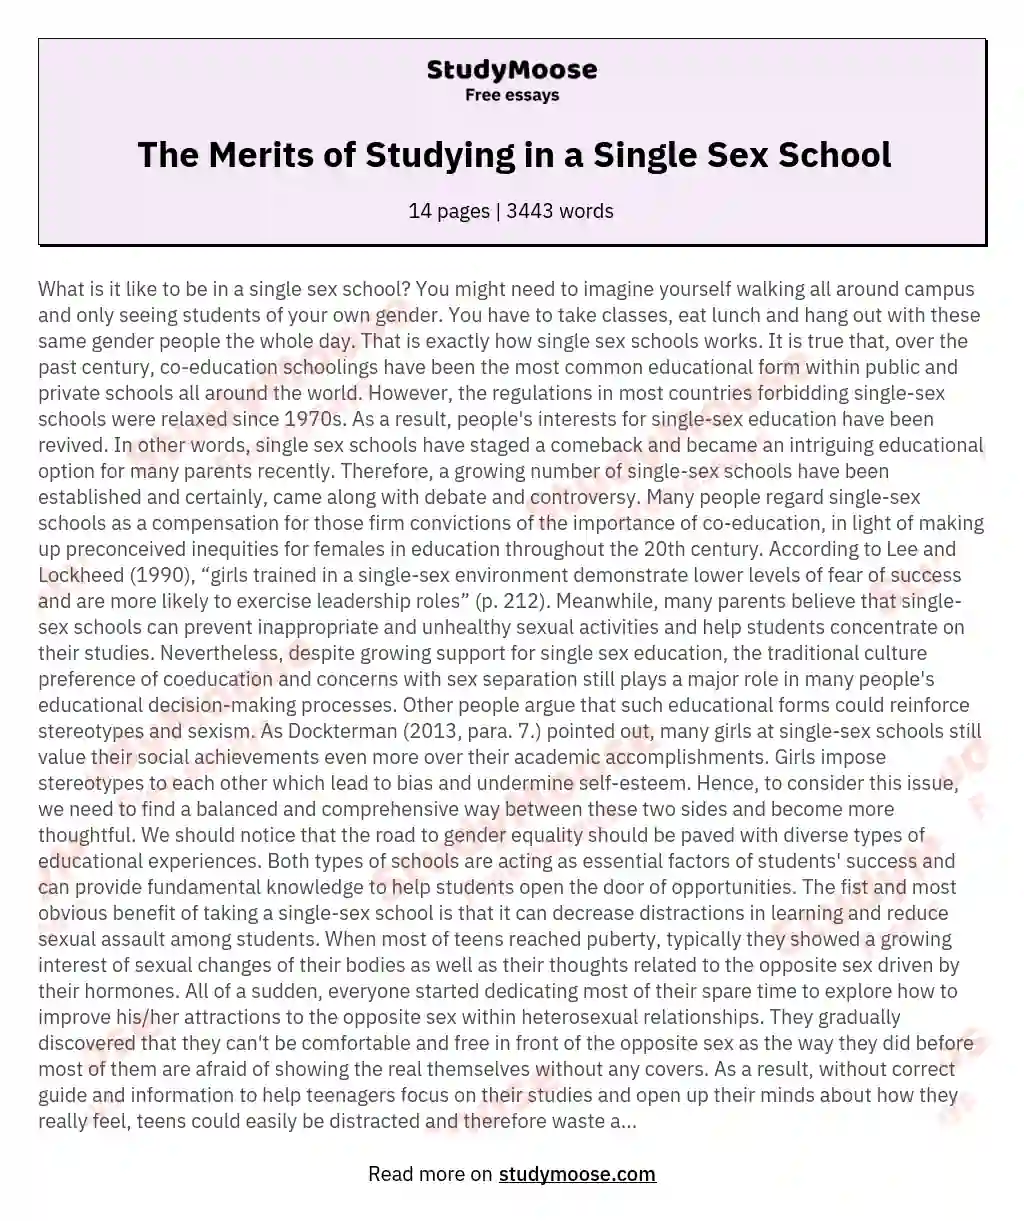 The Merits of Studying in a Single Sex School essay